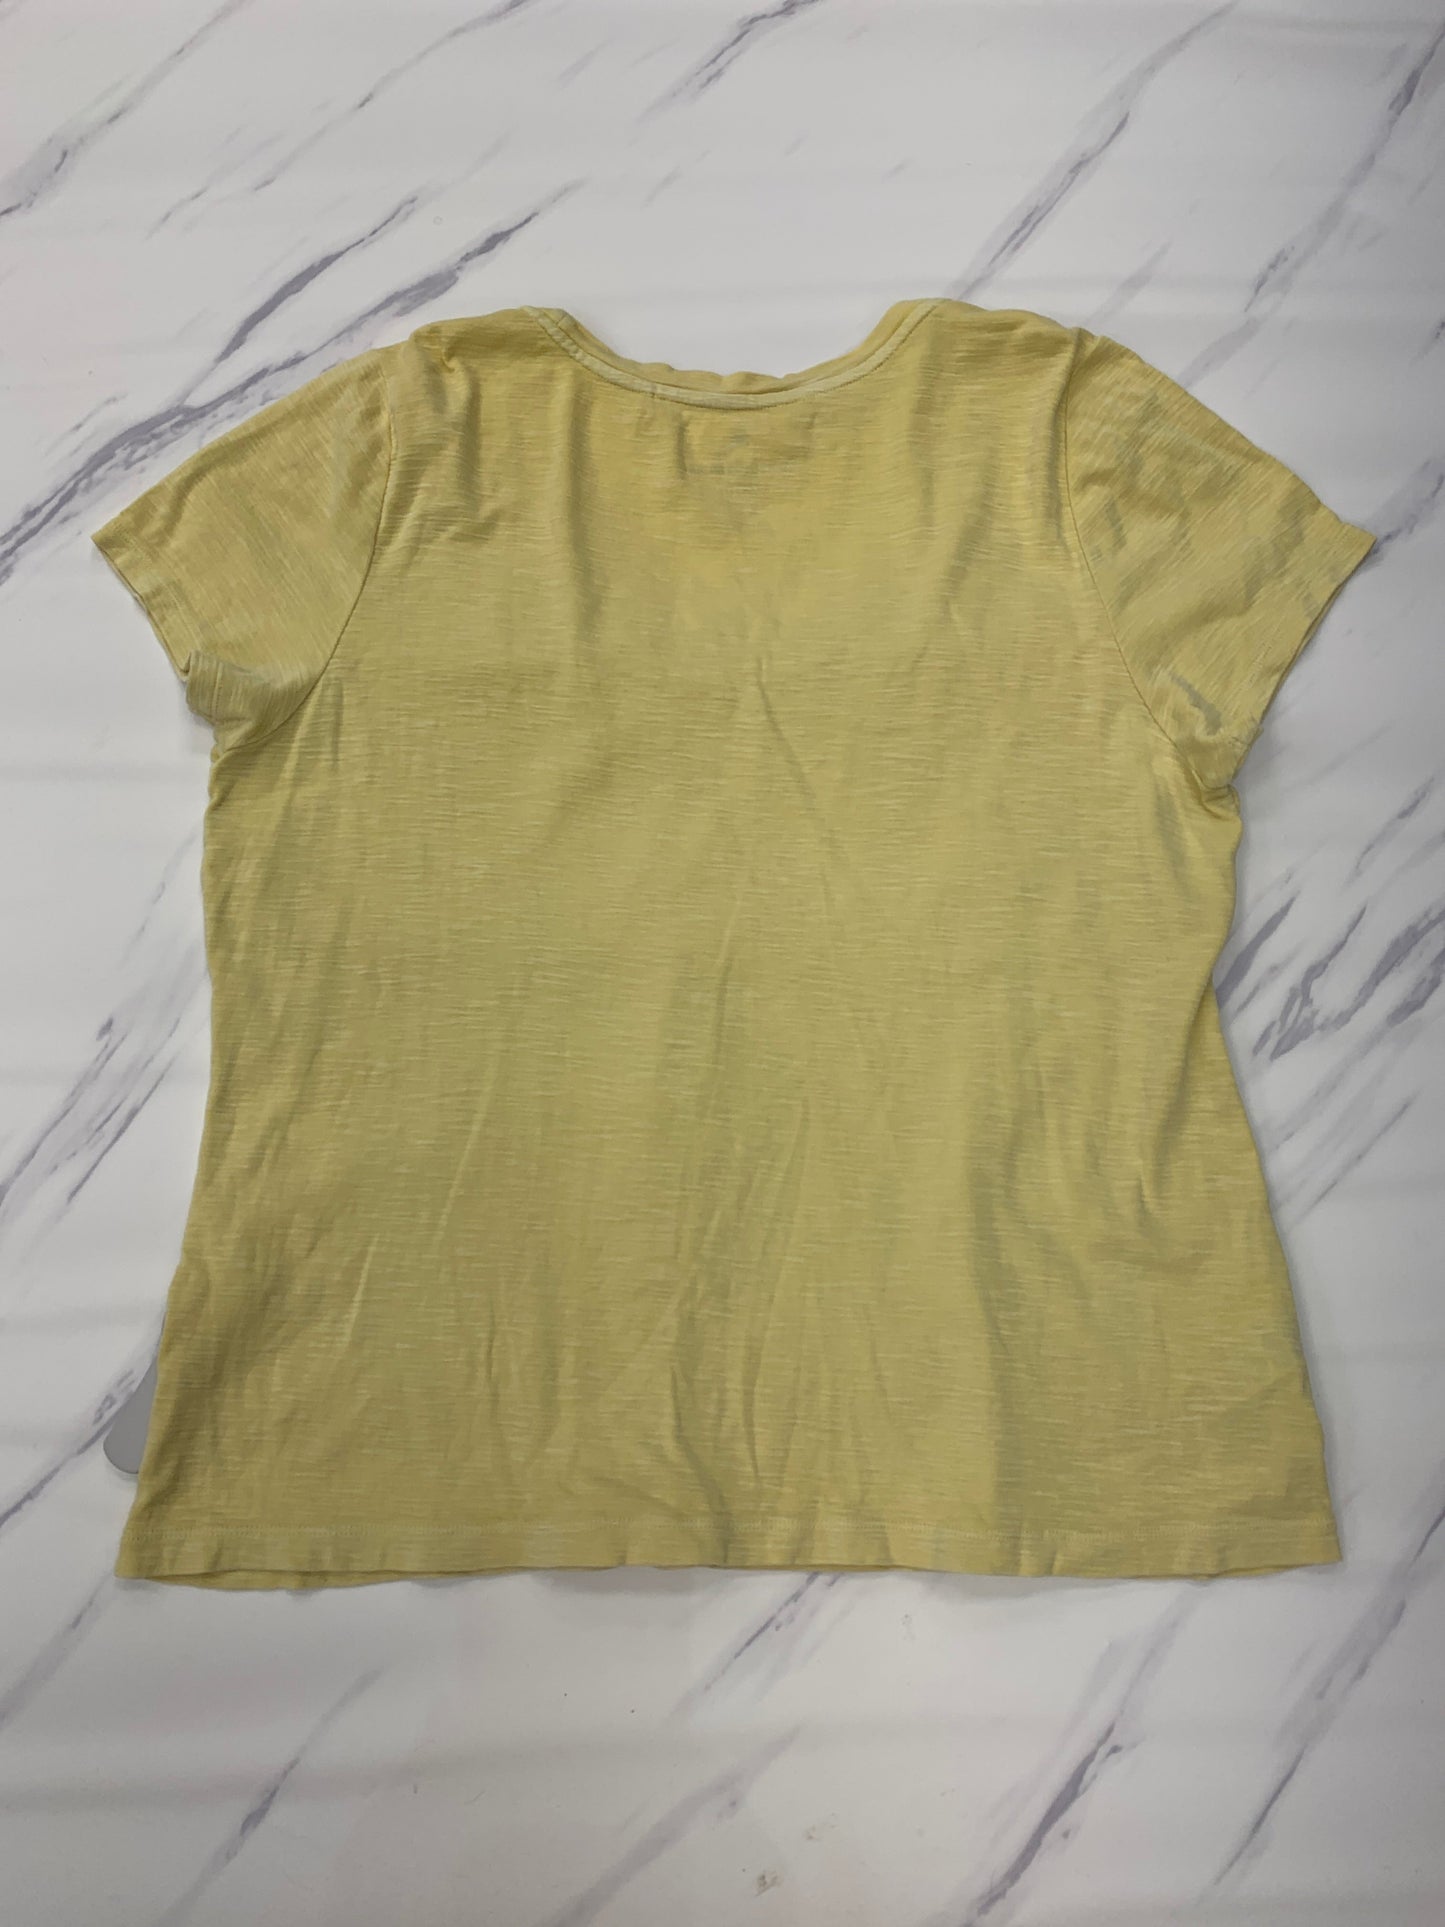 Yellow Top Short Sleeve Tommy Bahama, Size Xl